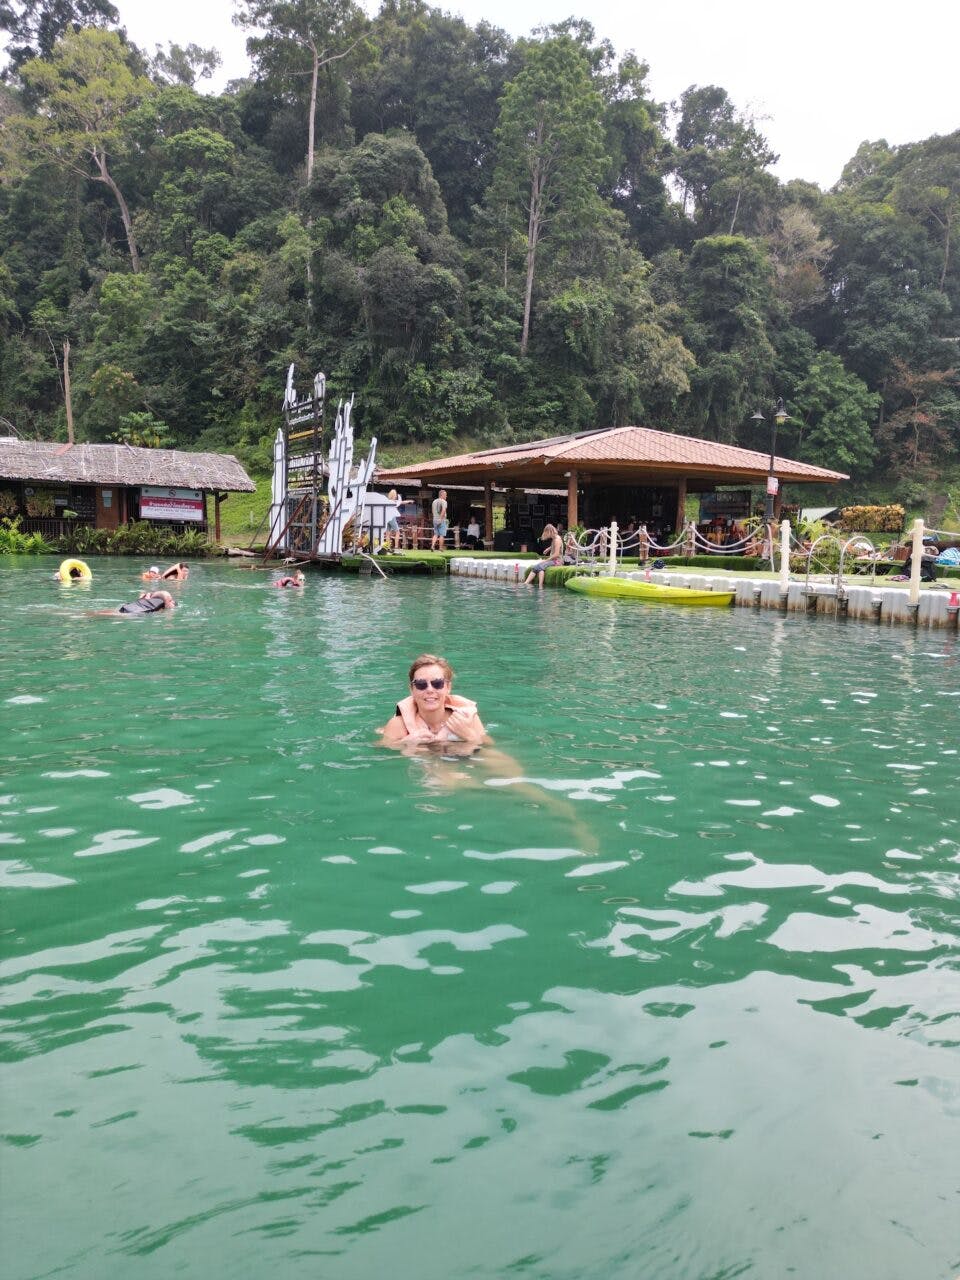 Joanna swims in the khao sok lake, behind her there is a small hut on the water. 